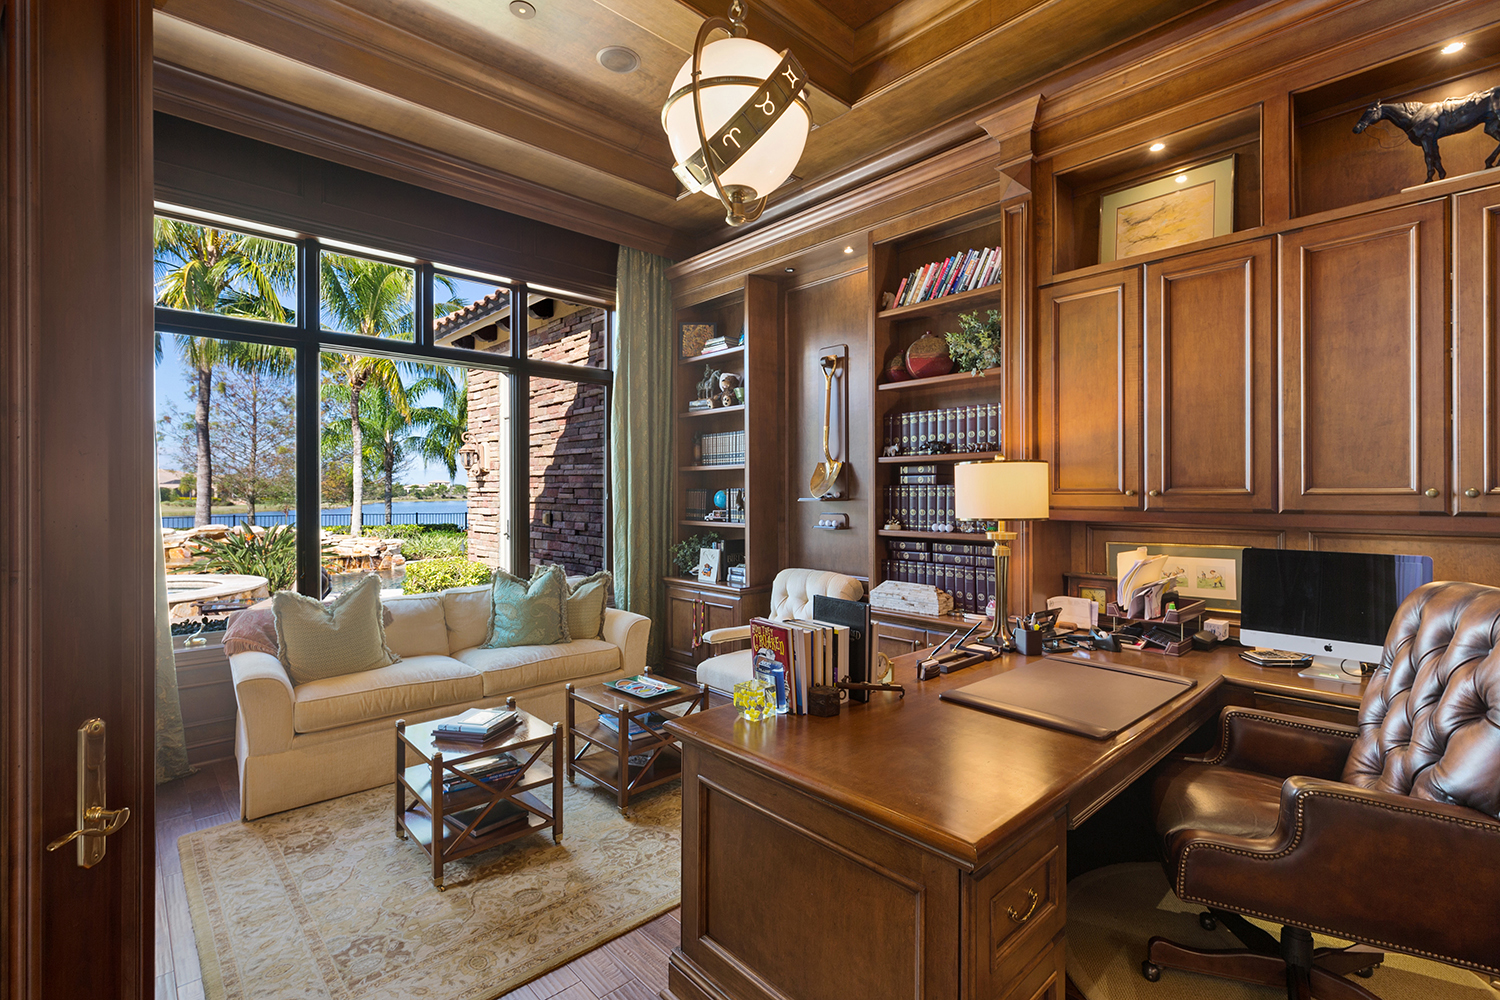 The office is a wood-paneled sanctuary where Randy Mallitz conducts his business and philanthropic activities.